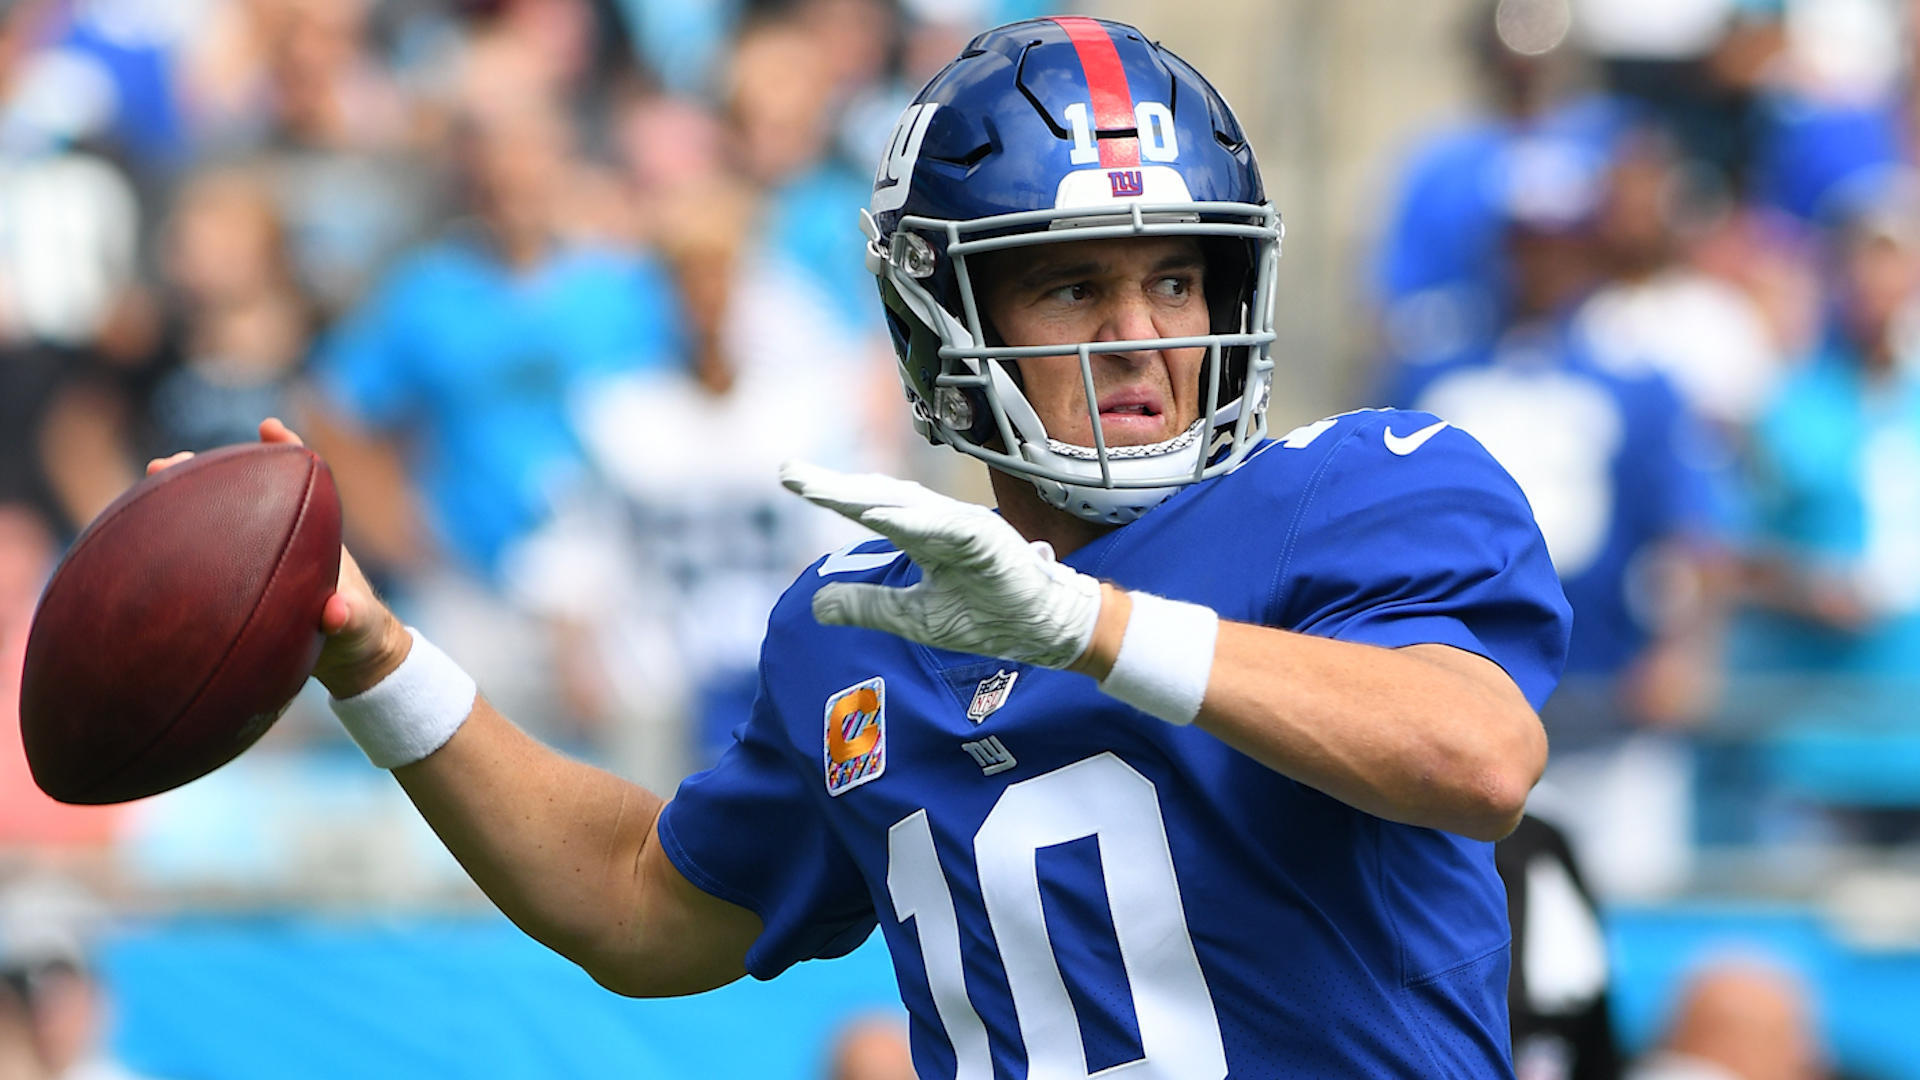 REPORT: Eli Manning Expected To Remain Giants Starting QB In 2019 - Daily Snark1920 x 1080